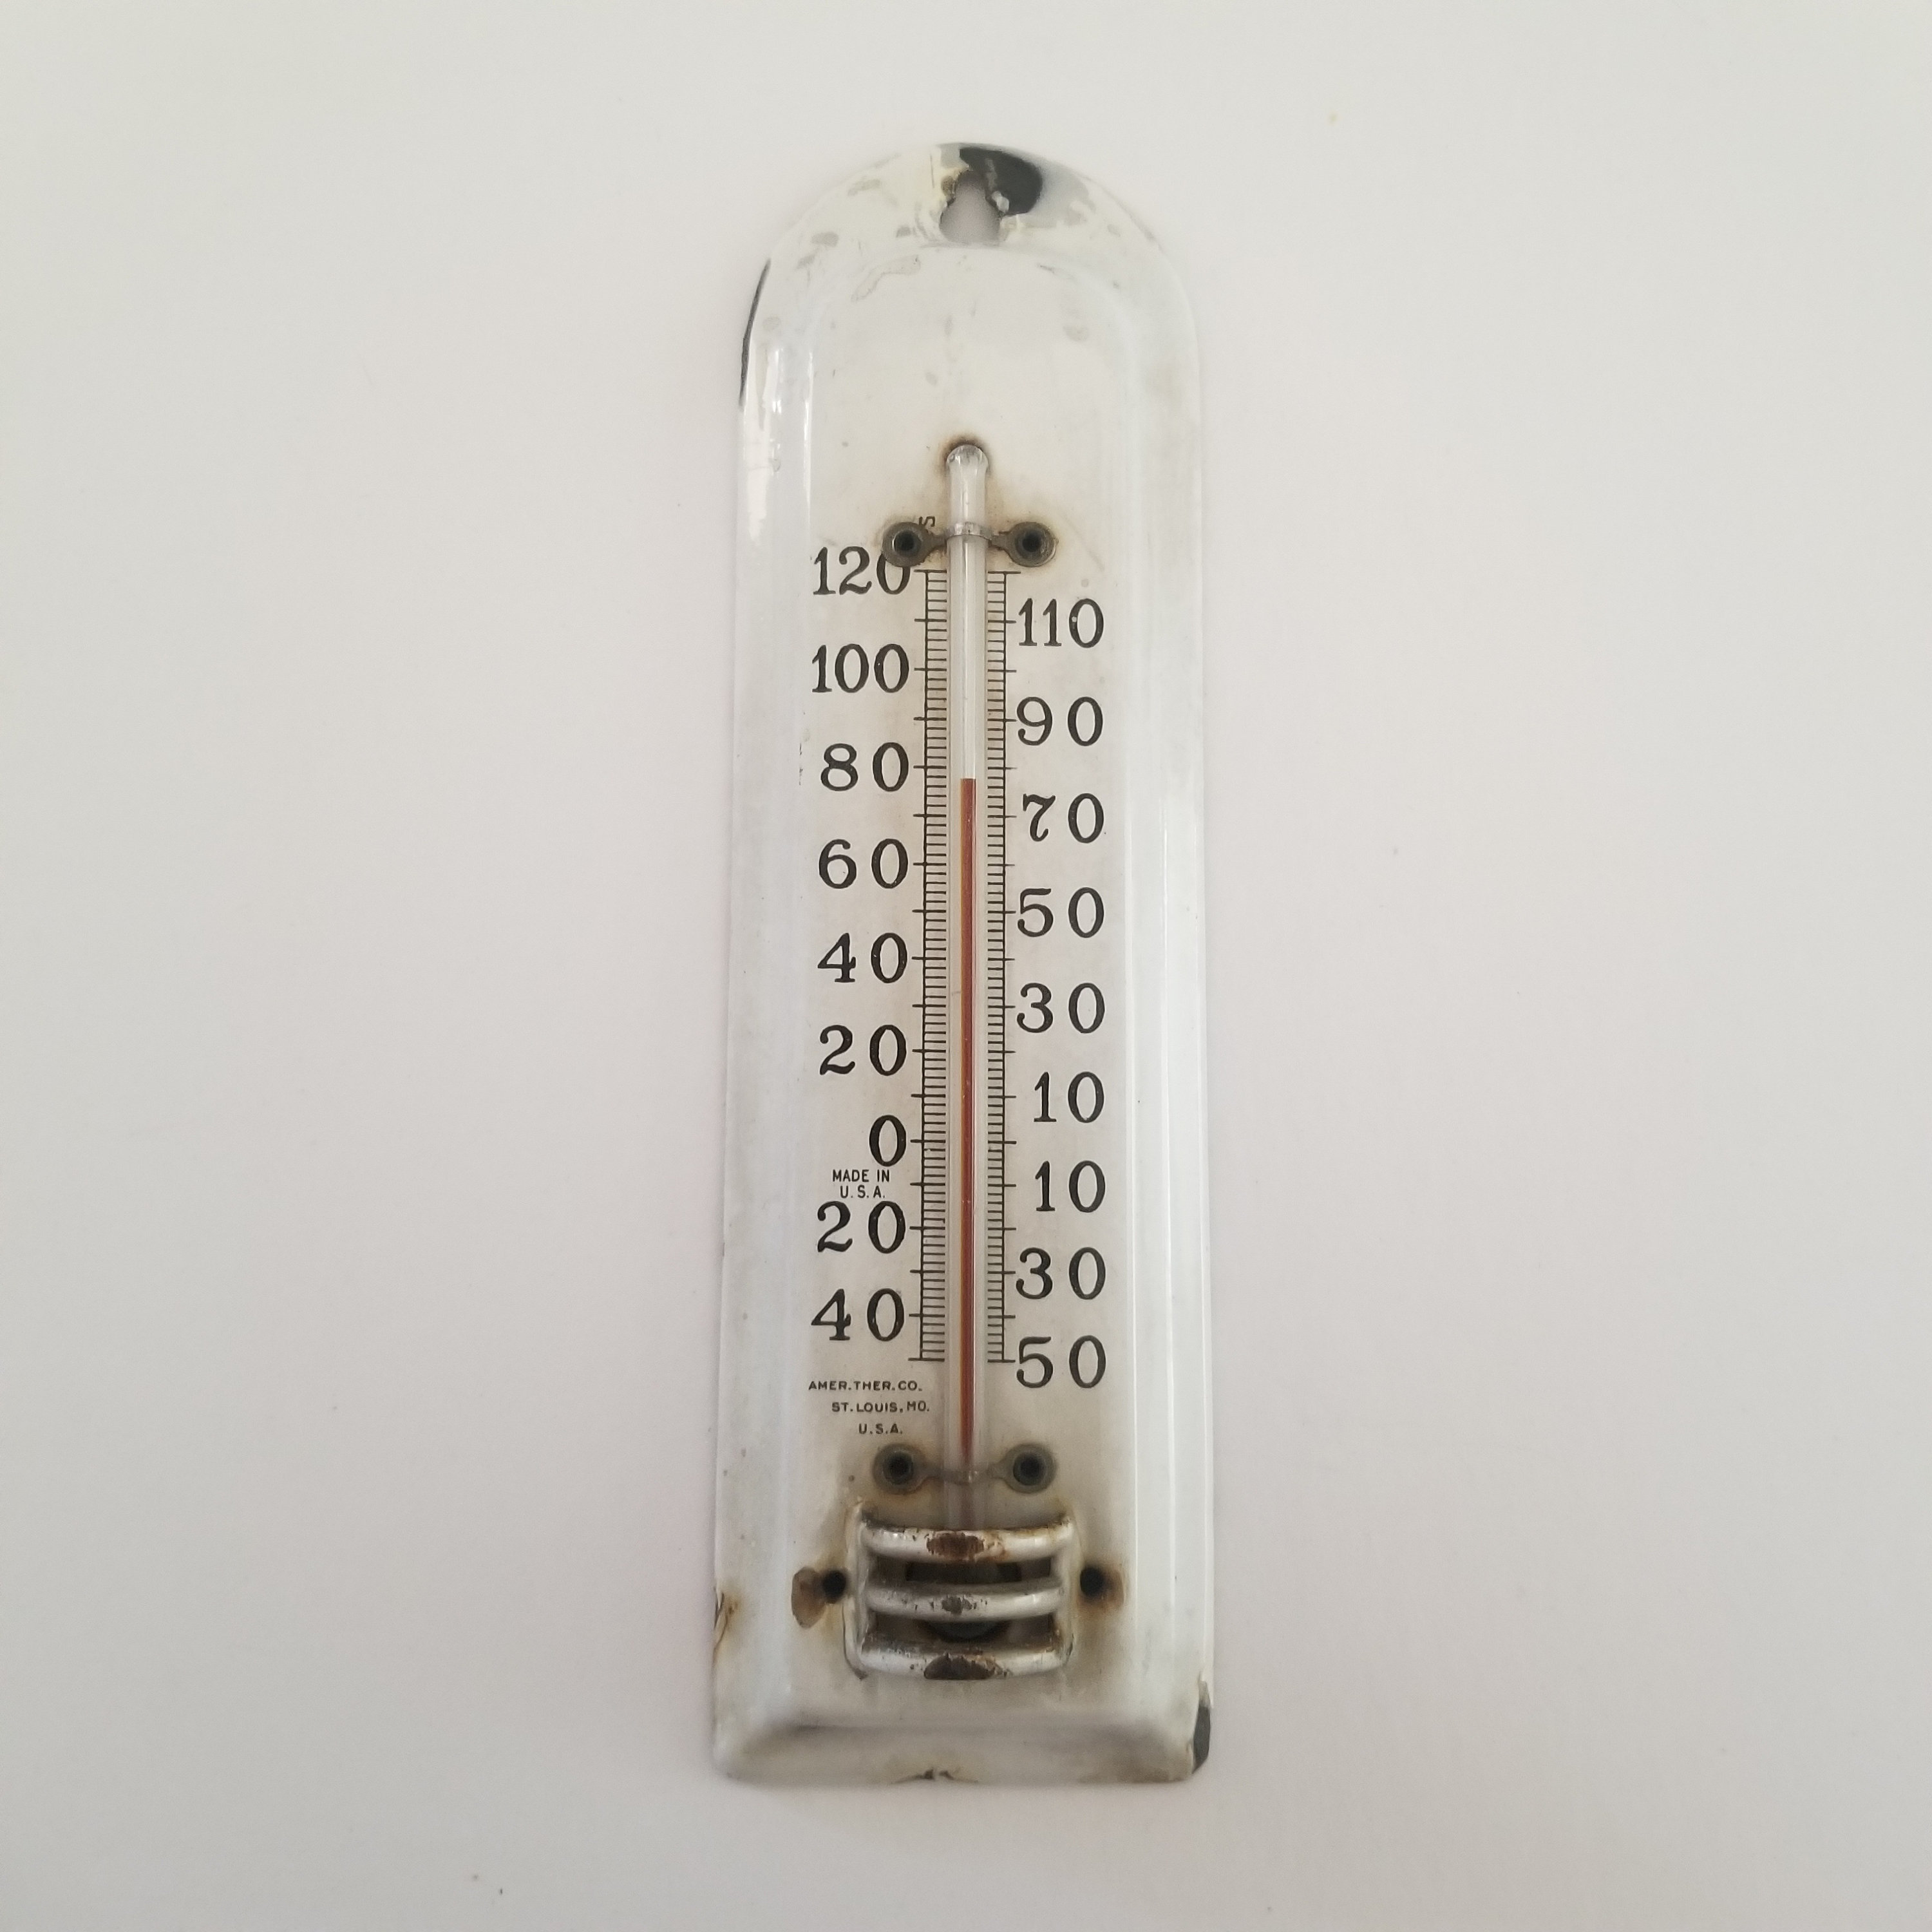 Vintage Porcelain Oven Temperature Thermometer Gauge Stand Up